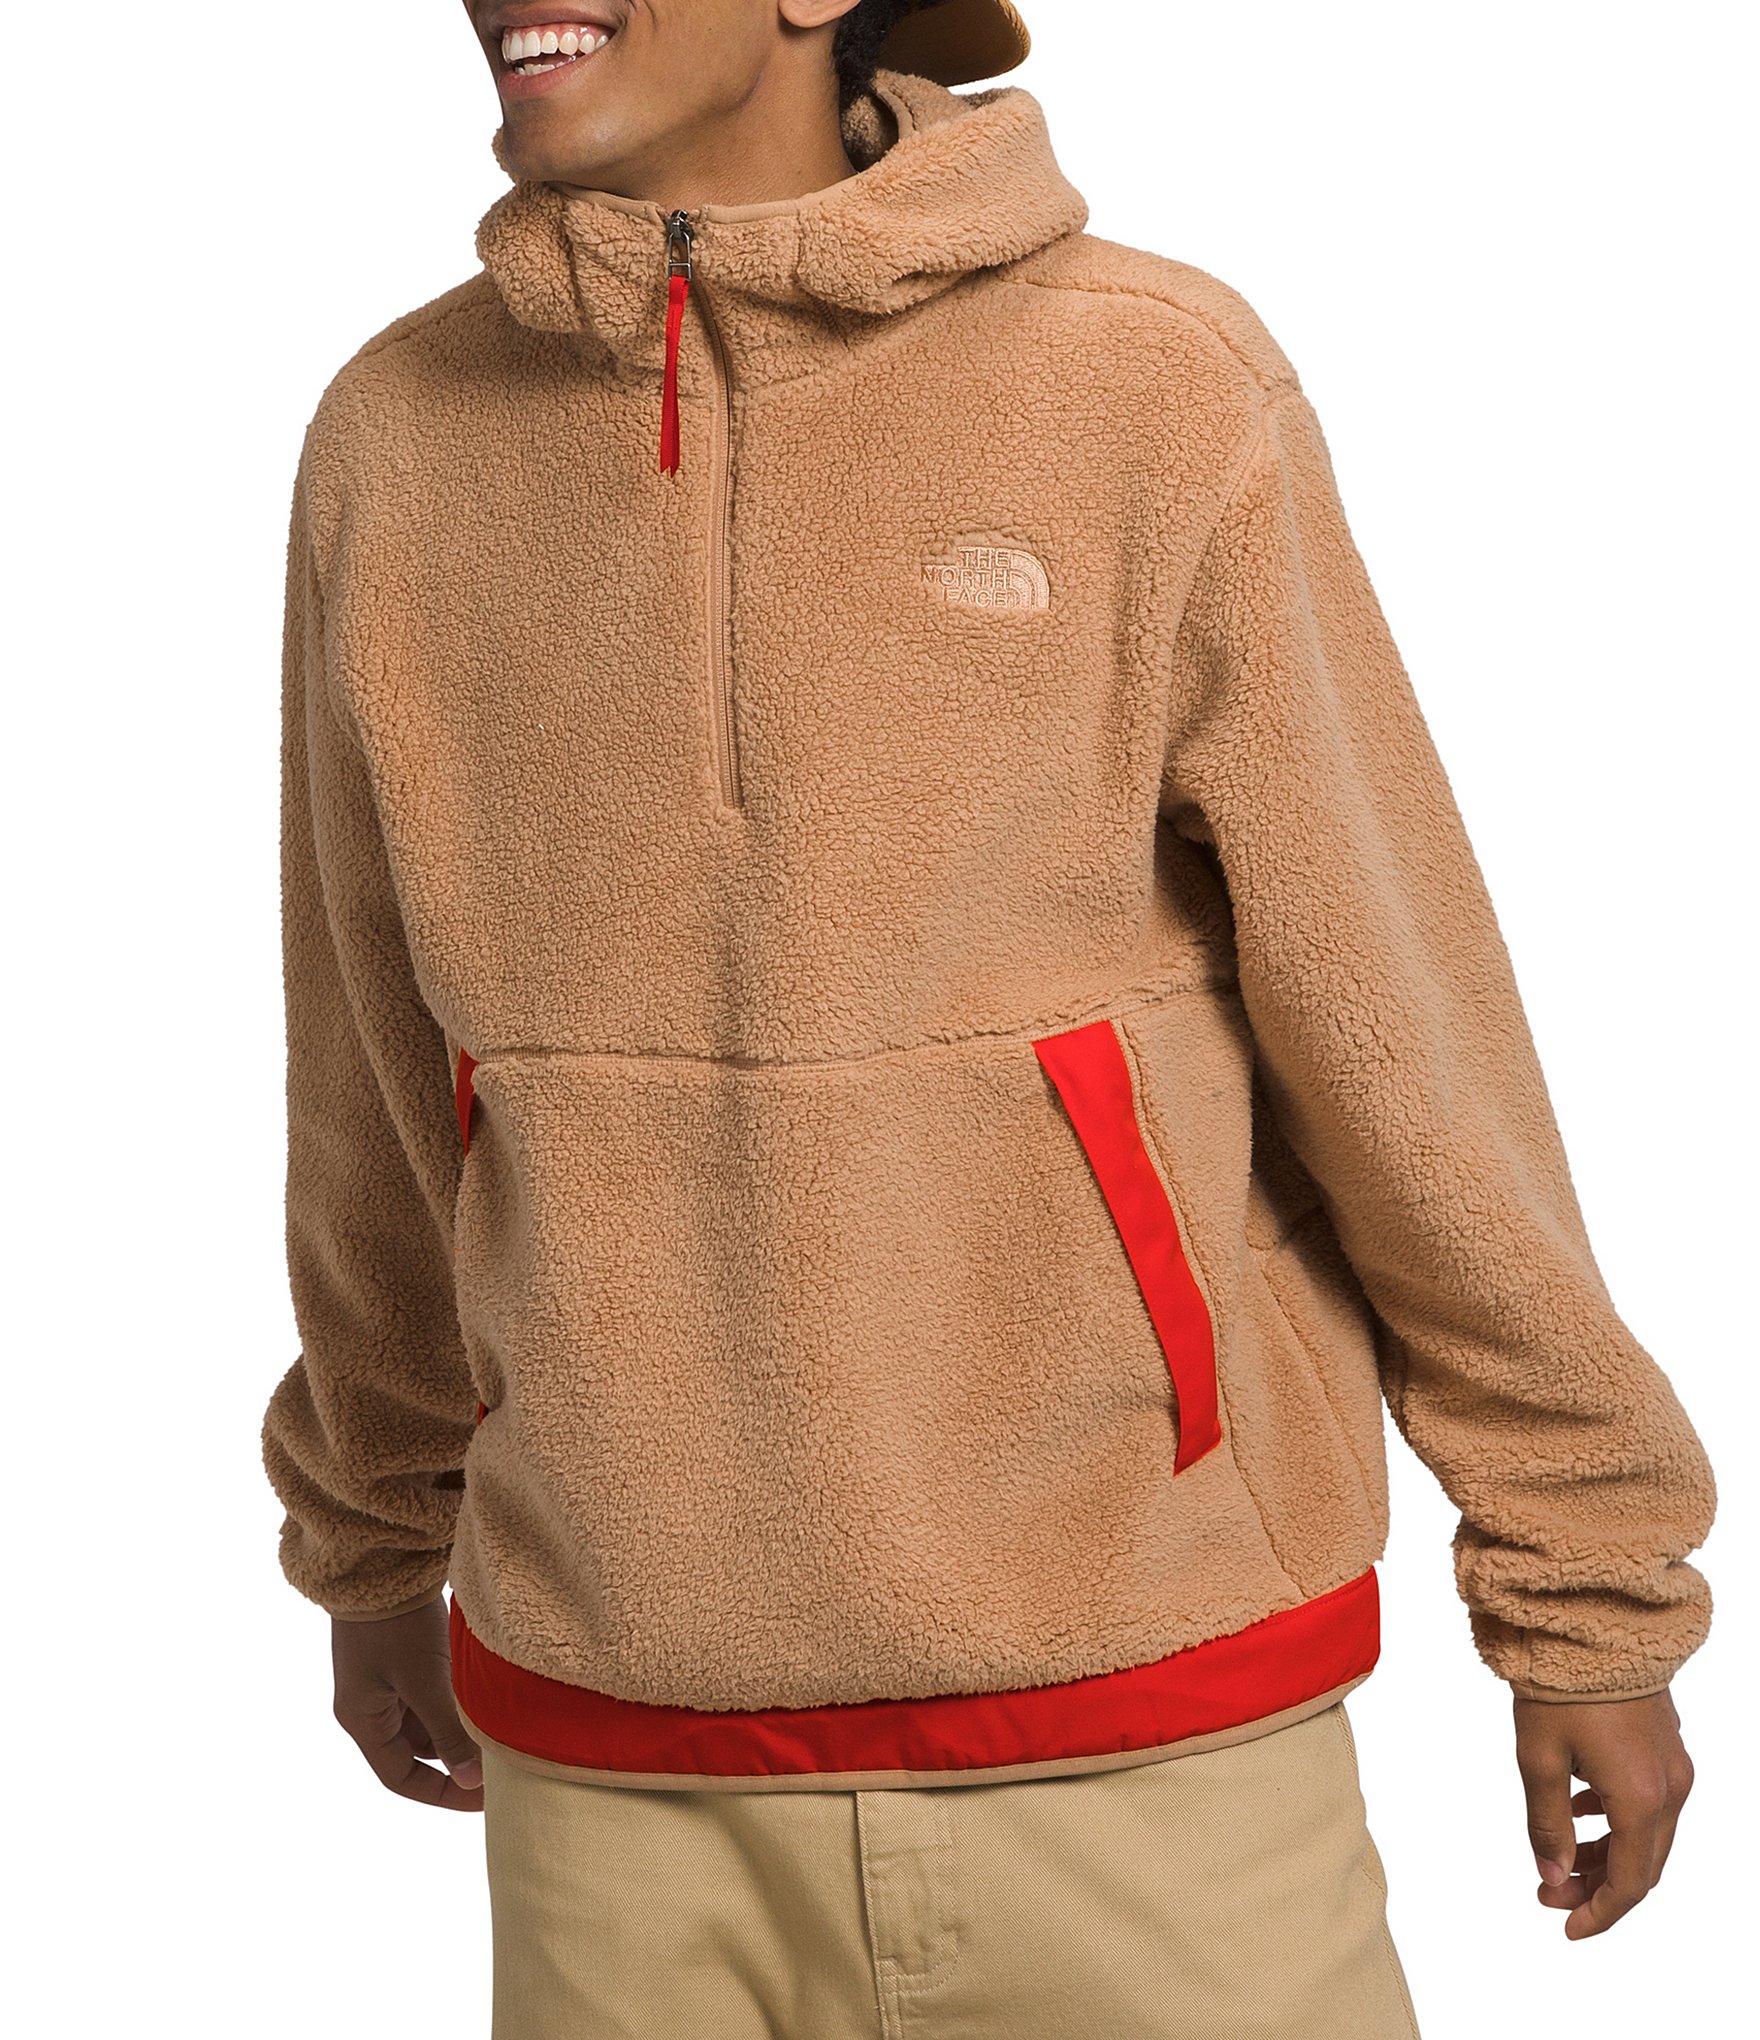 https://dimg.dillards.com/is/image/DillardsZoom/zoom/the-north-face-long-sleeve-campshire-fleece-hoodie/00000001_zi_8d3668c6-7cf5-4769-9bf4-af6d7482846e.jpg